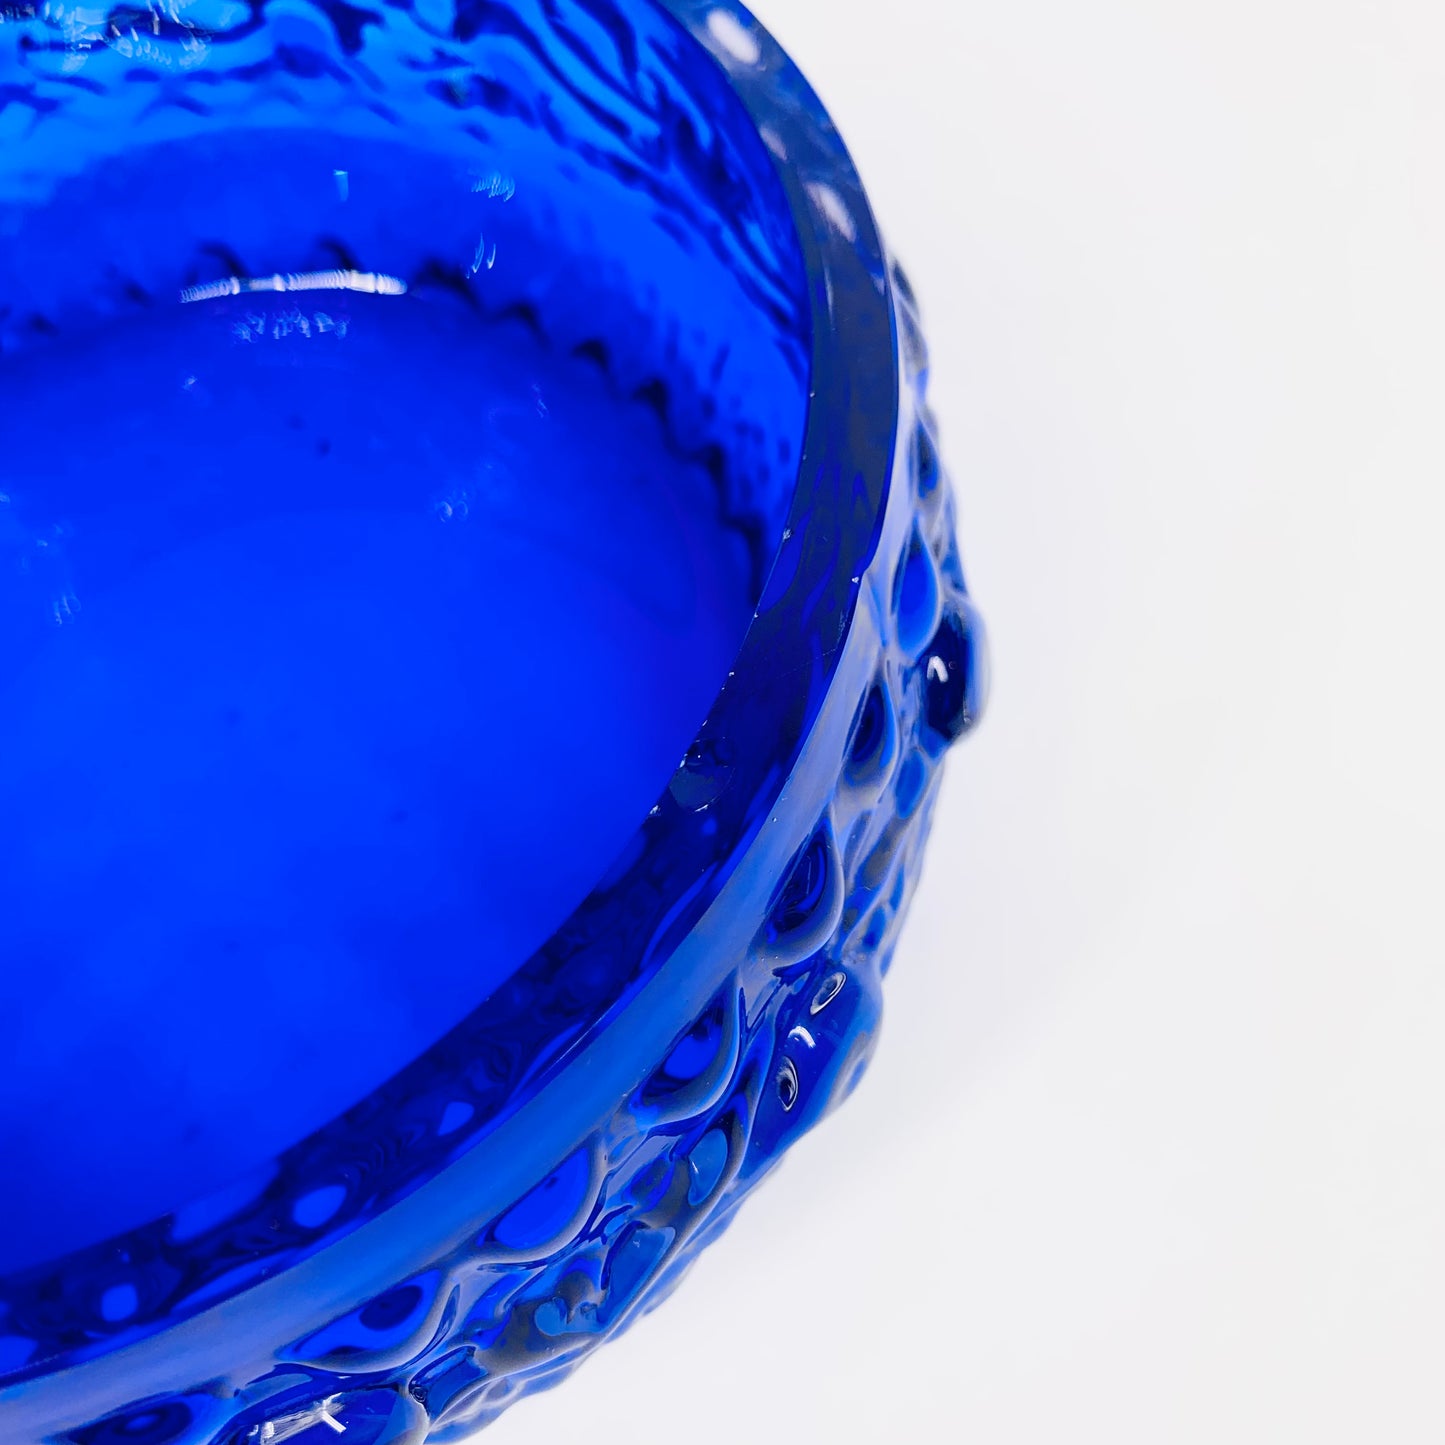 Midcentury Finnish cobalt blue glass bowl by Tamara Aladin with relief